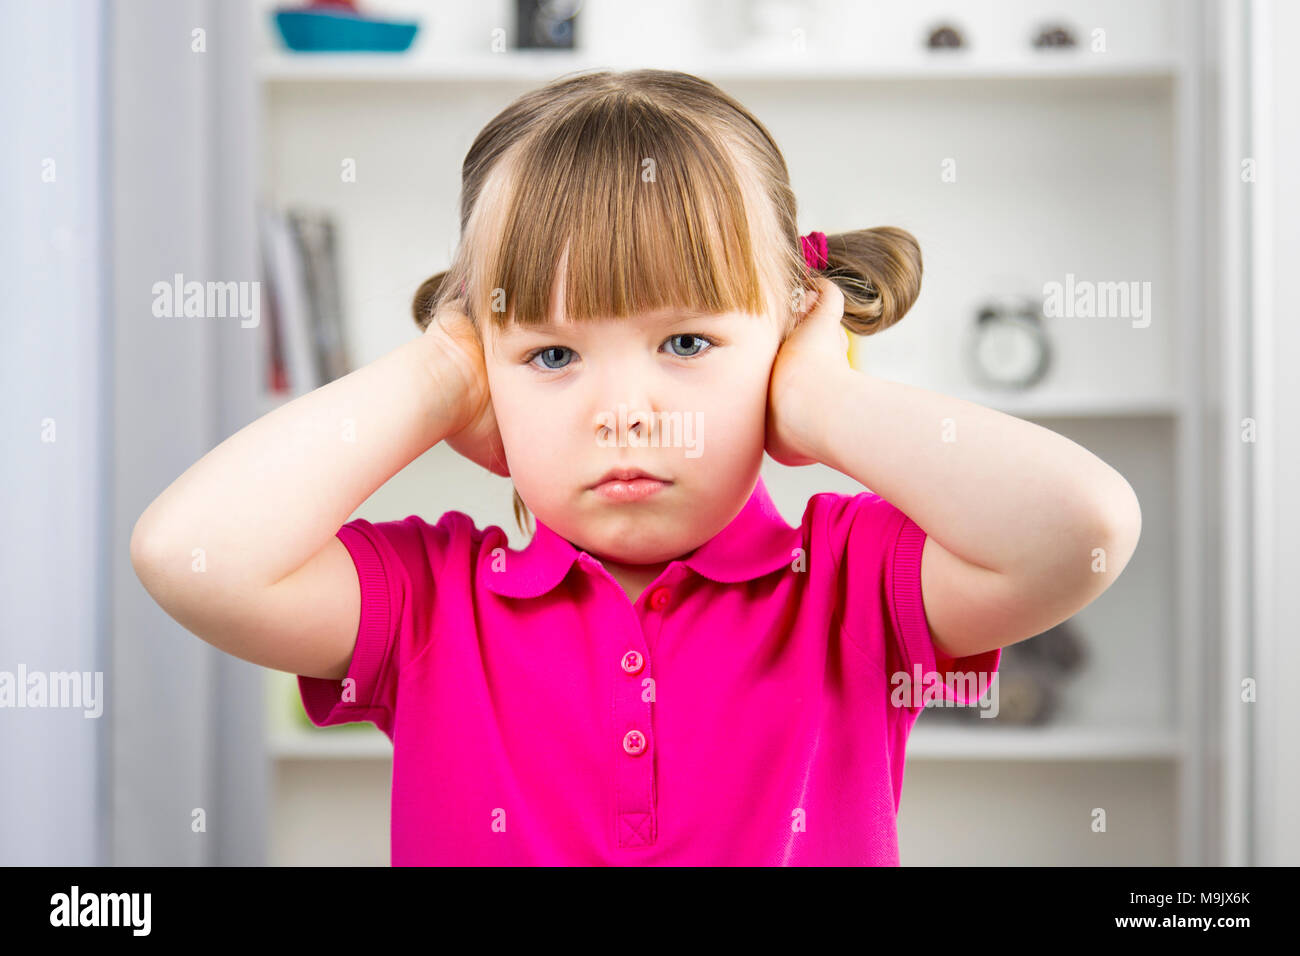 Cute little girl covering ears with hands Horizontal Stock Photo